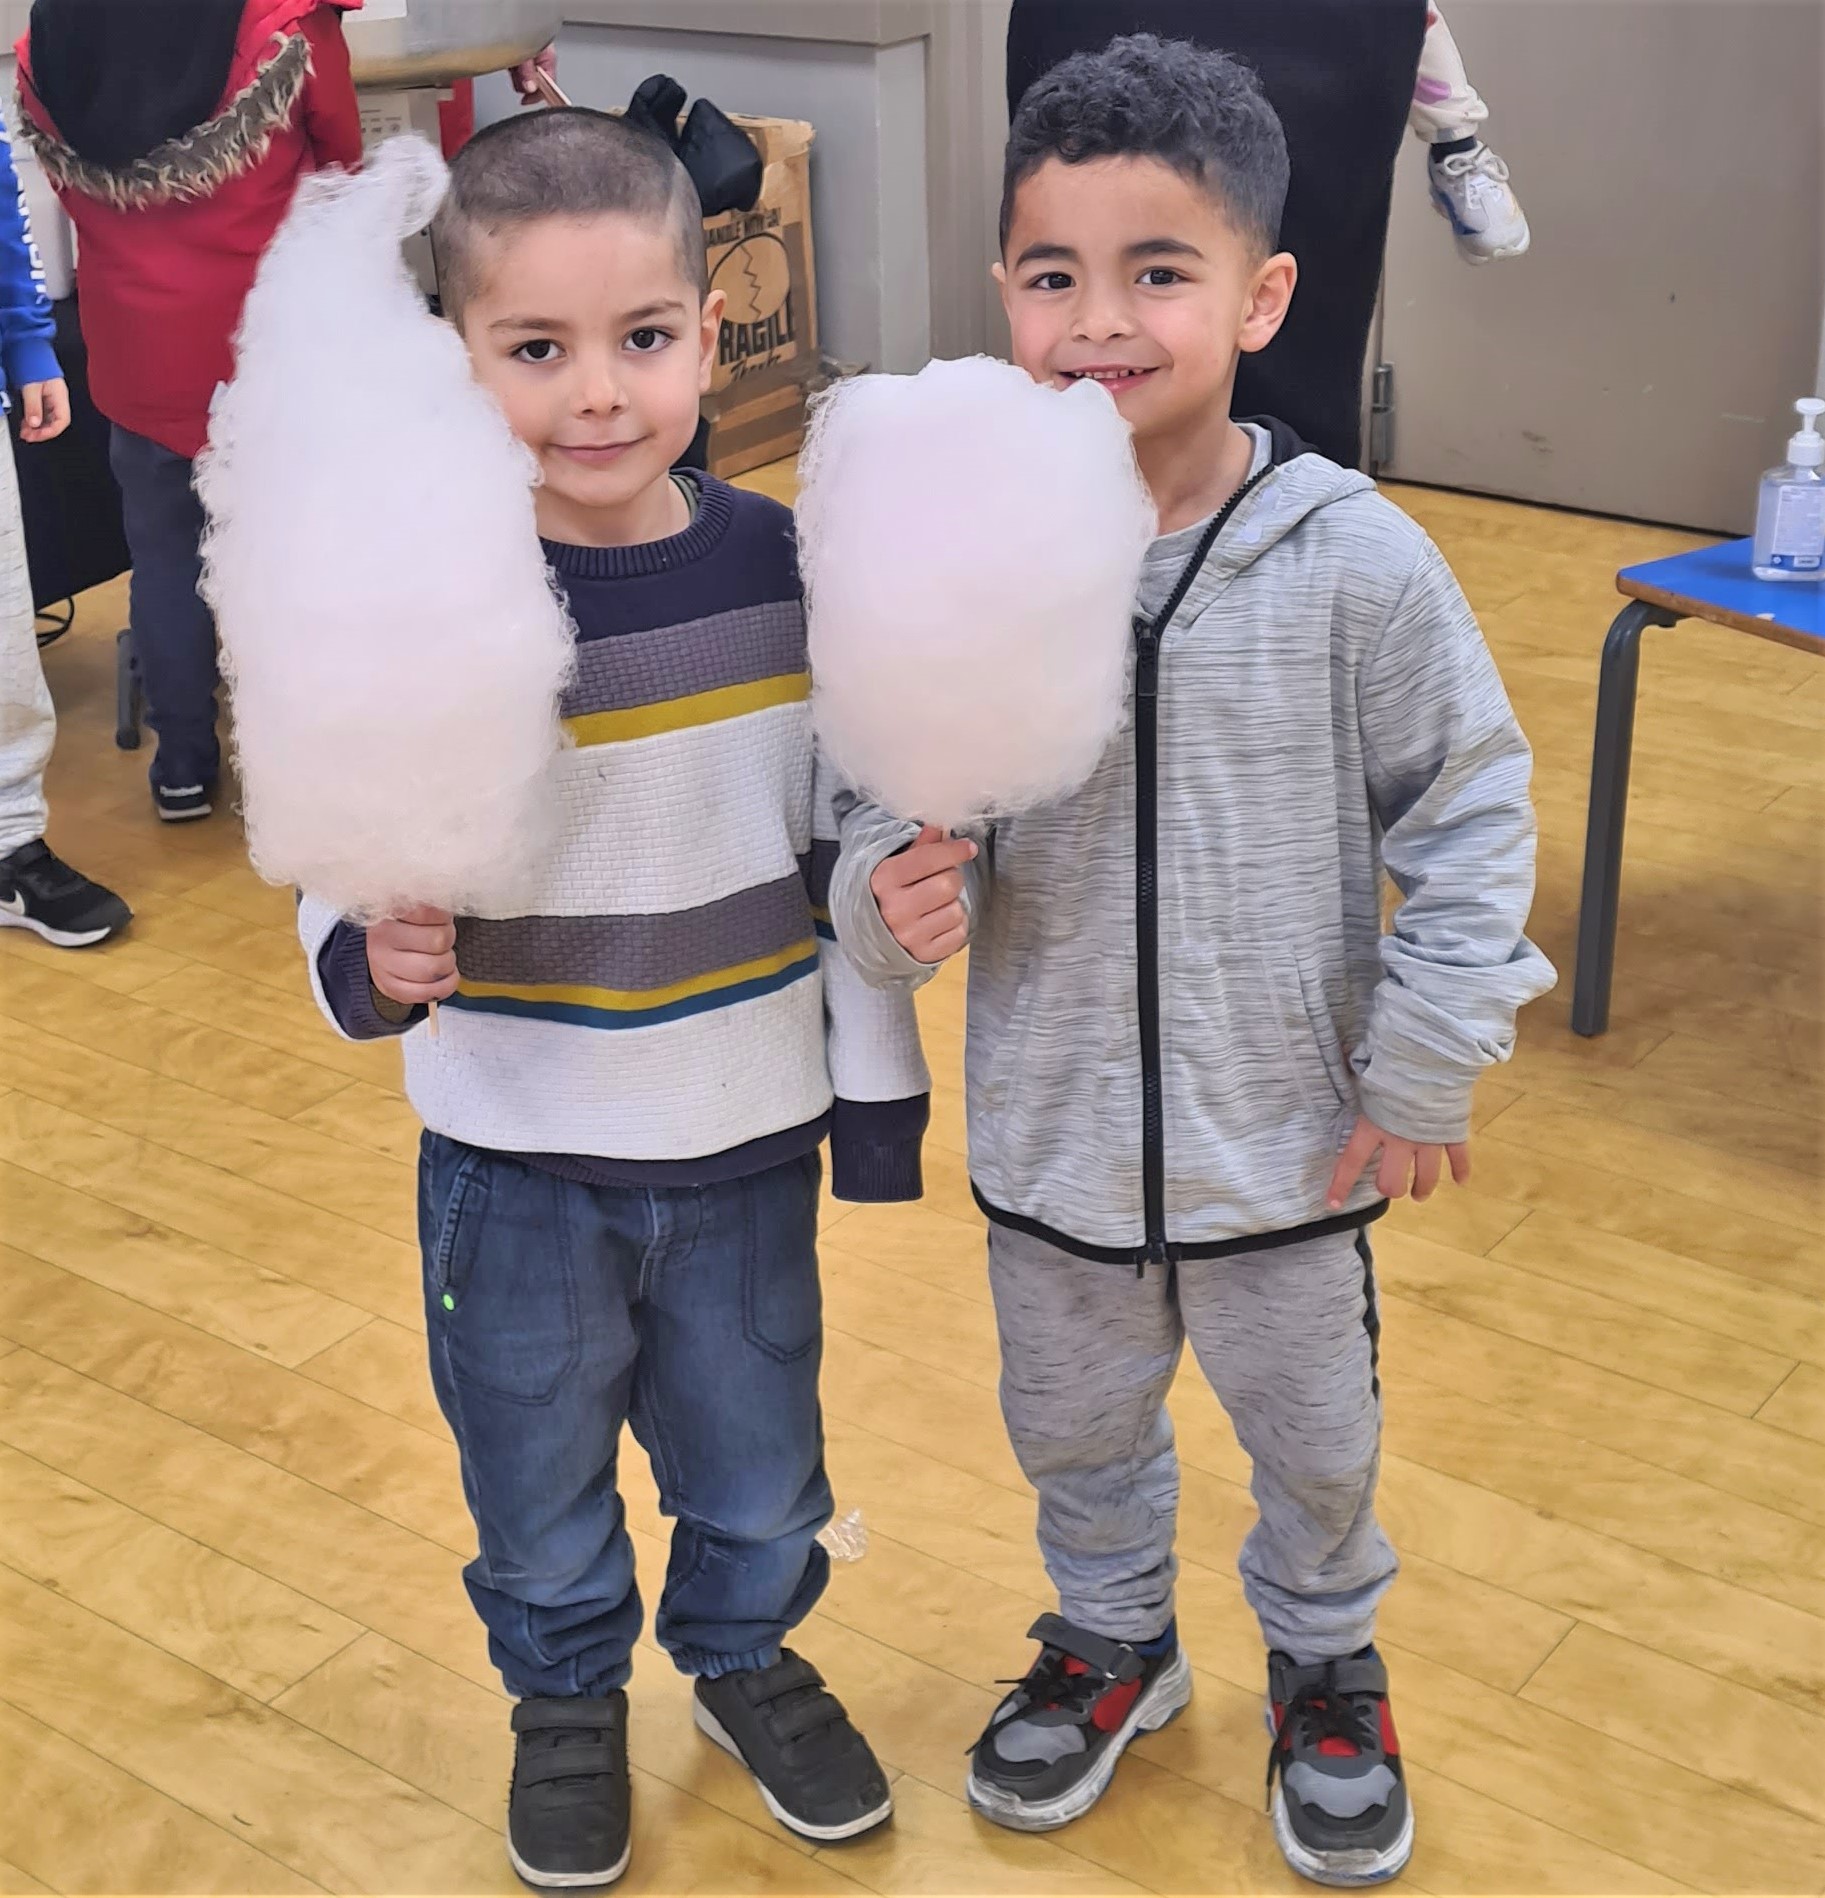 Two small children holding very large candyfloss